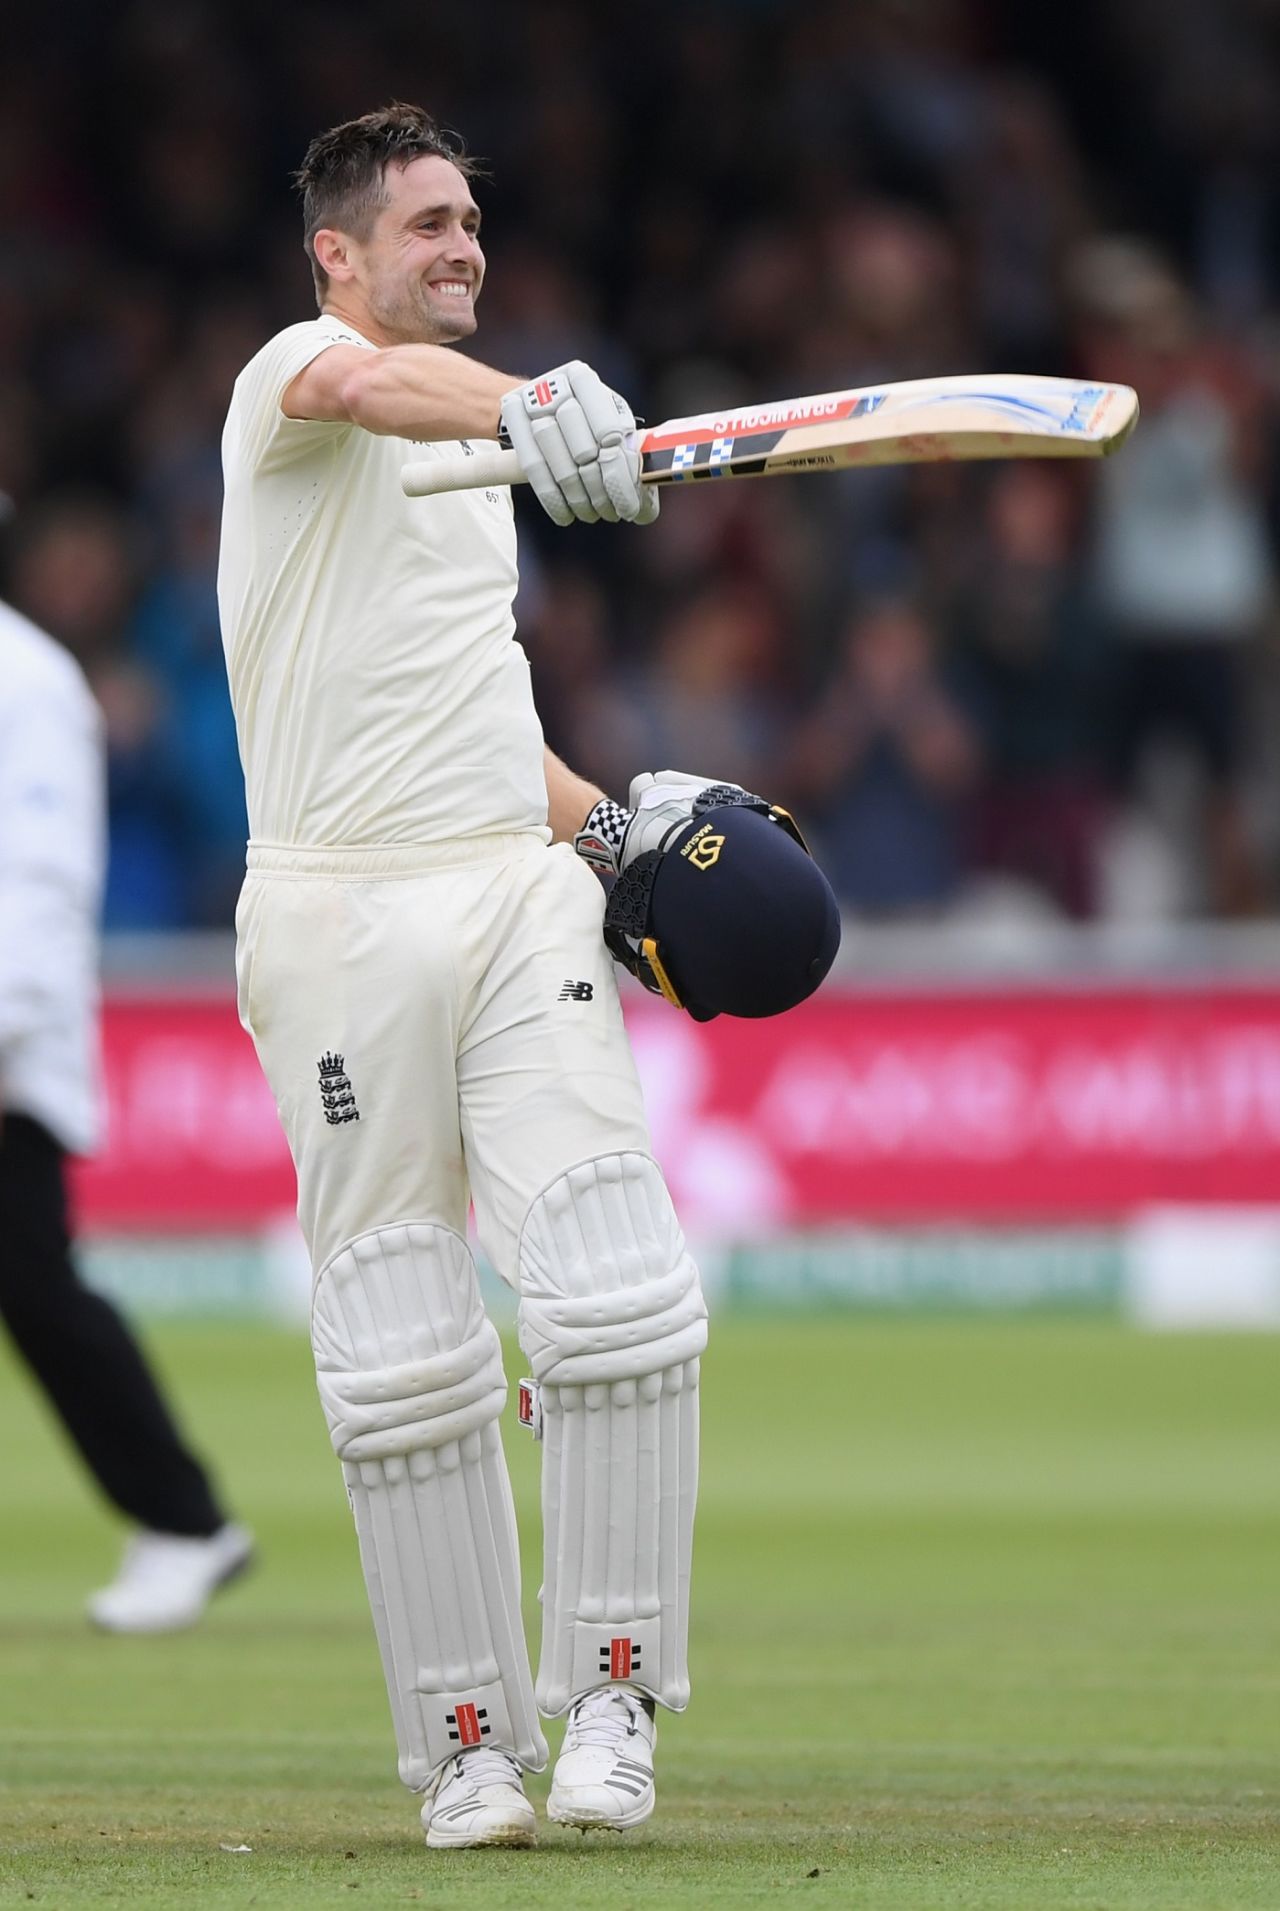 Chris Woakes celebrates reaching his hundred, England v India, 2nd Test, Lord's, 3rd day, August 11, 2018